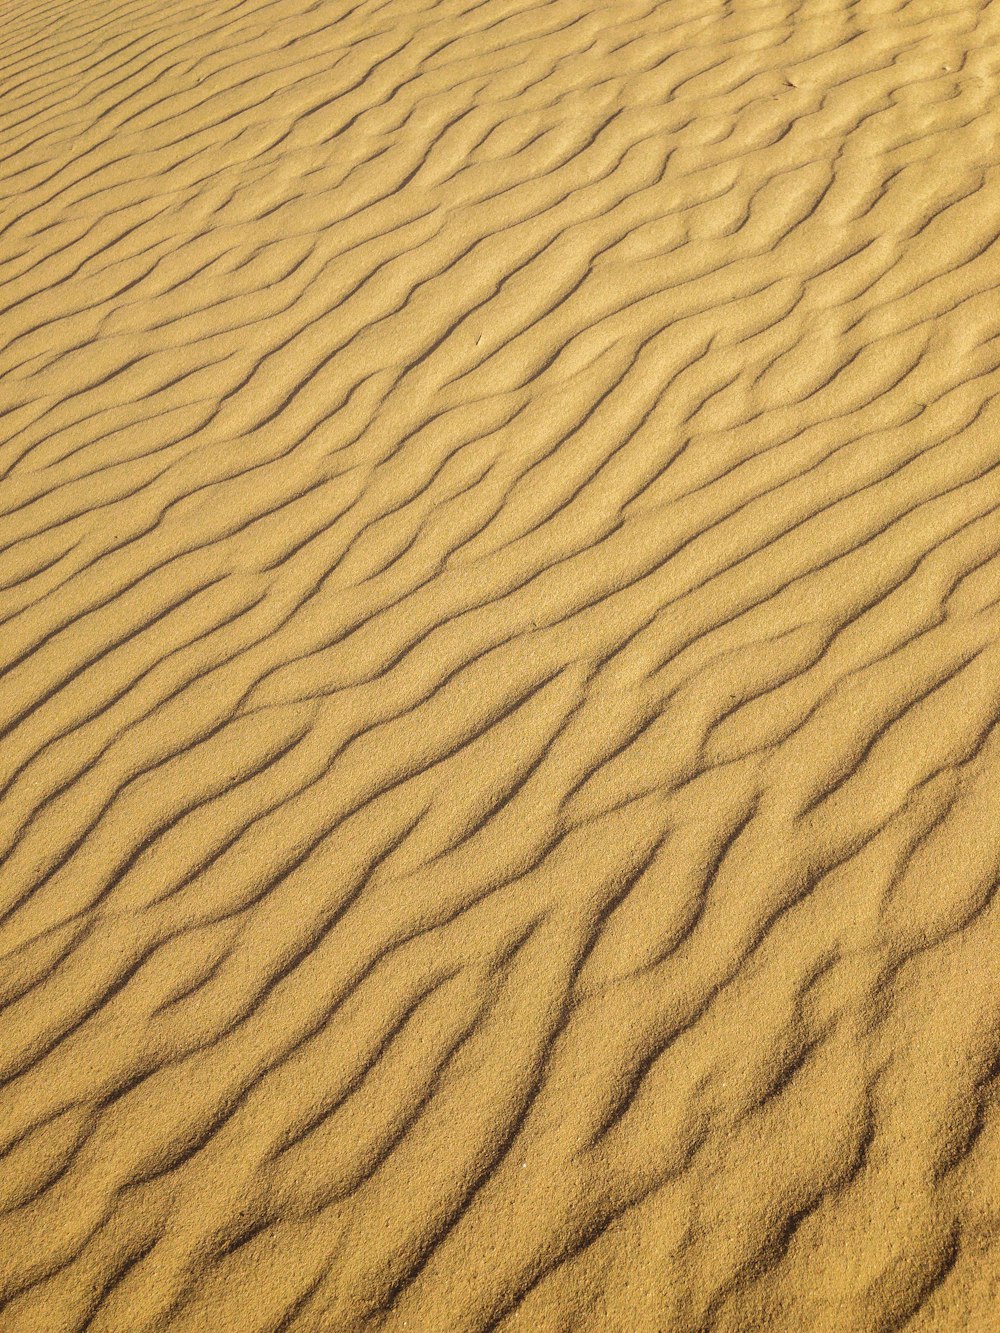 a sandy area with lines in the sand